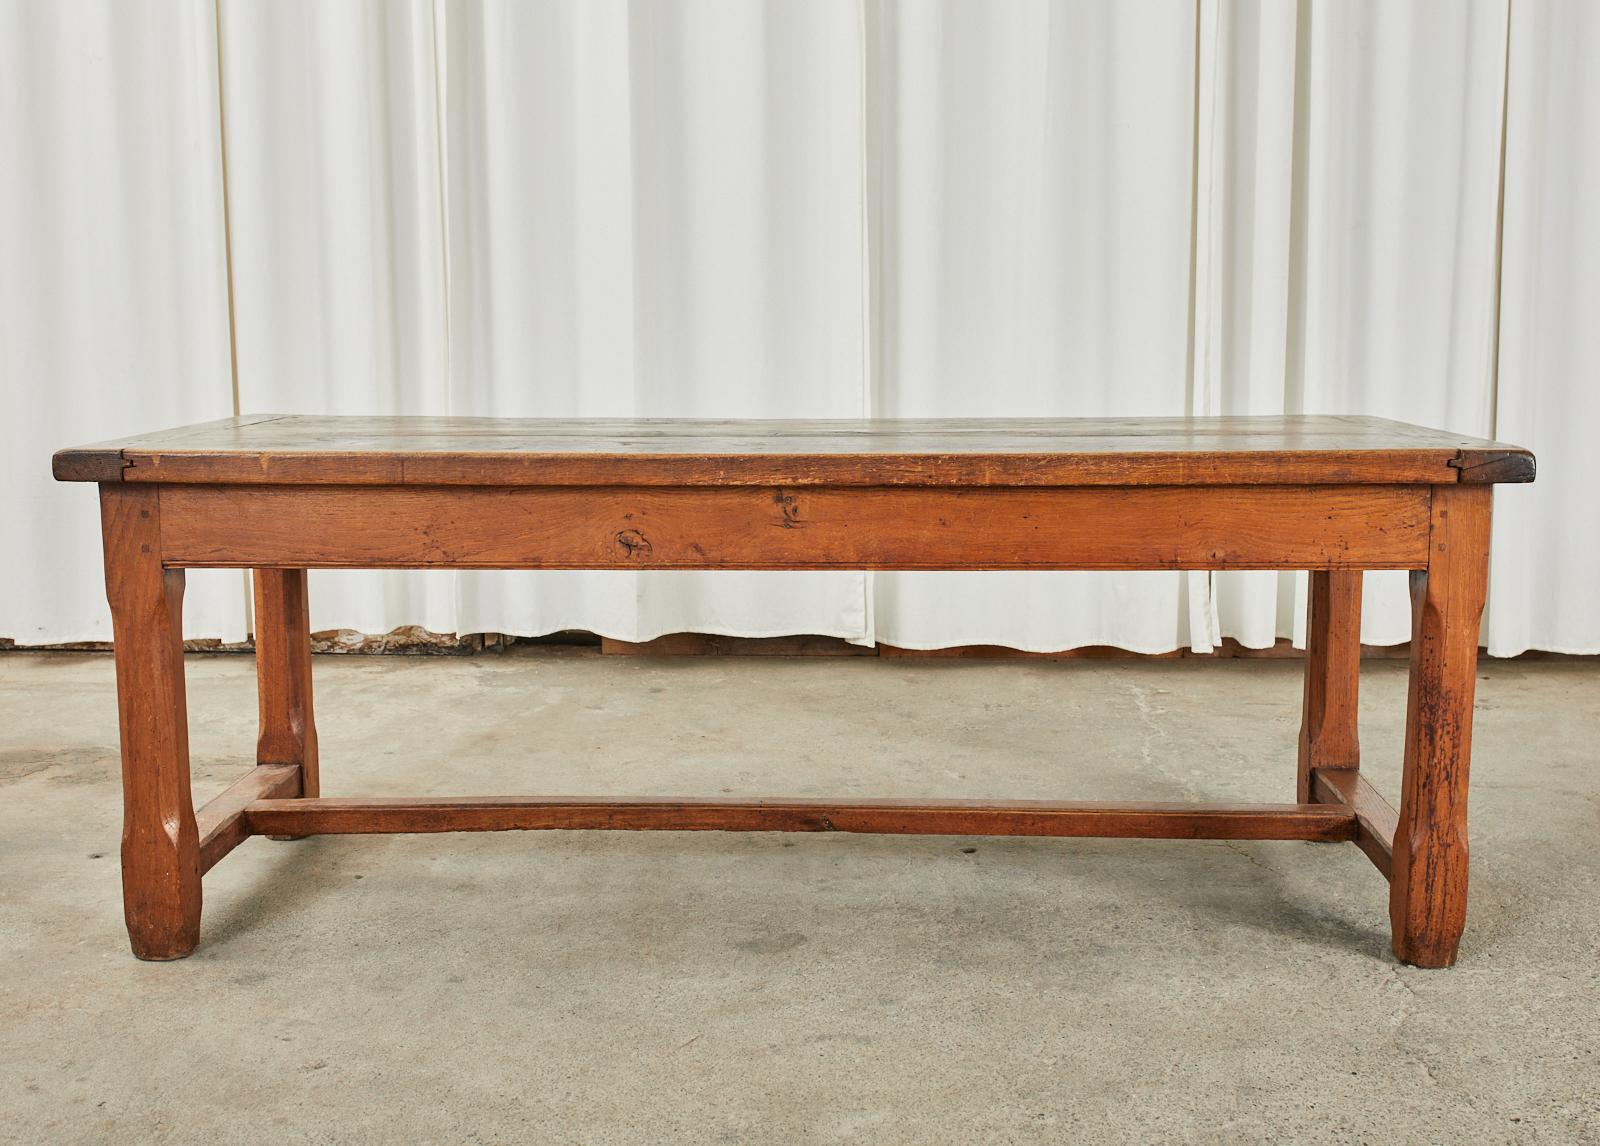 Hand-Crafted 19th Century Country French Provincial Oak Farmhouse Trestle Table